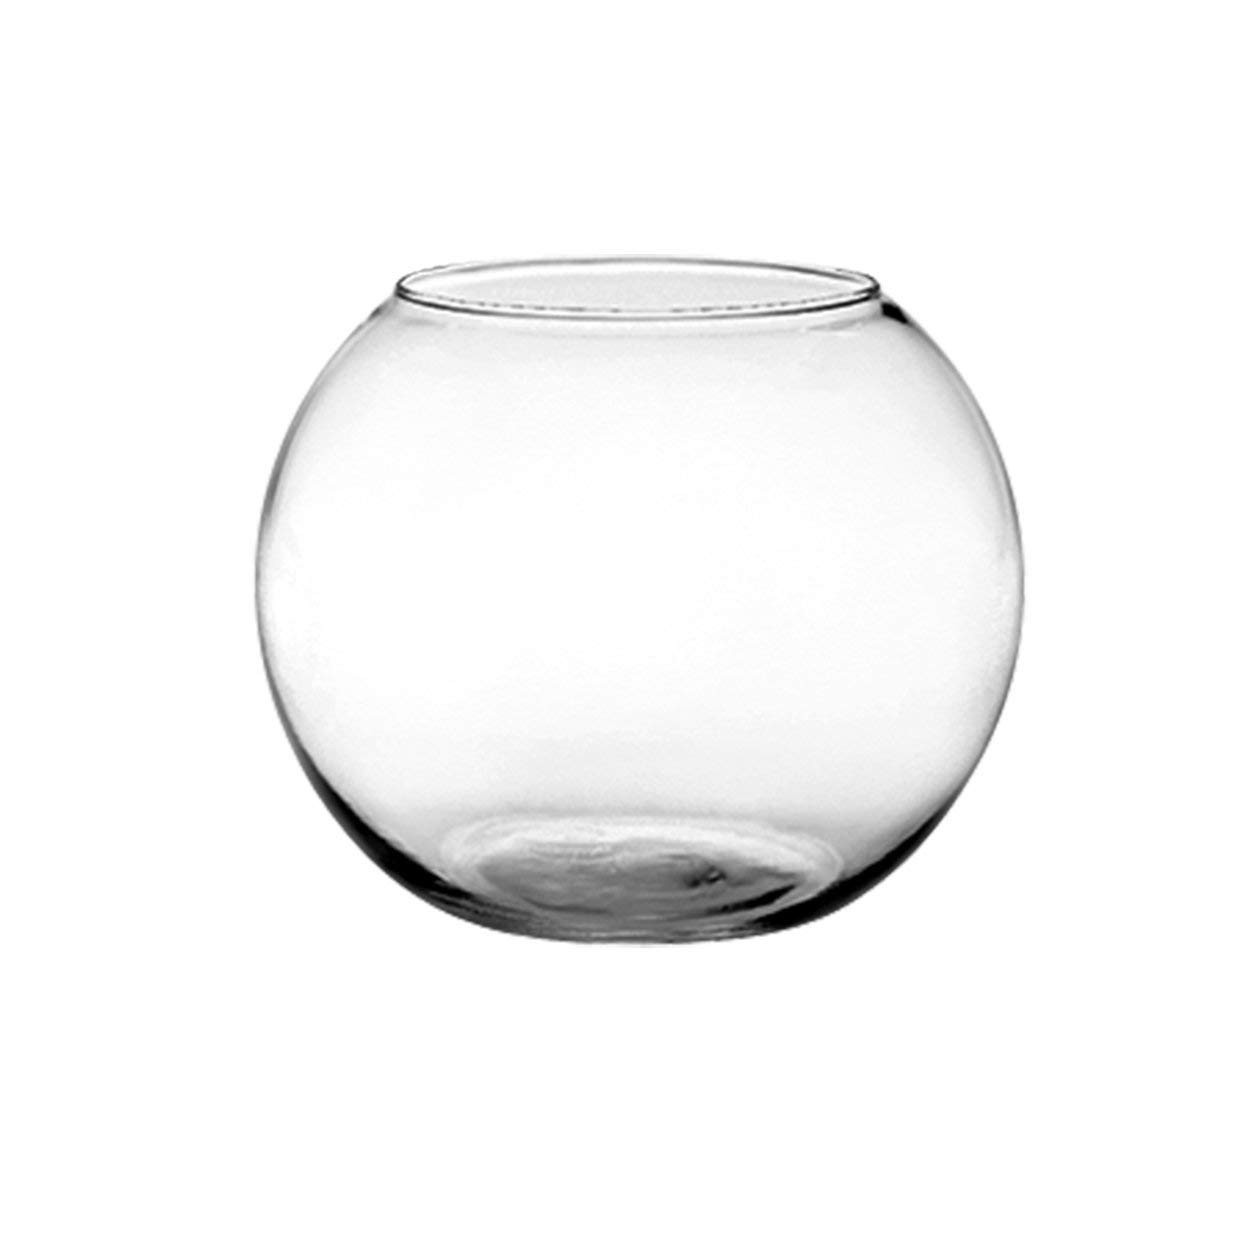 15 Stylish Bubble Glass Bud Vase 2024 free download bubble glass bud vase of amazon com set of 4 syndicate sales 6 inches clear rose bowl inside amazon com set of 4 syndicate sales 6 inches clear rose bowl bundled by maven gifts garden outdoo